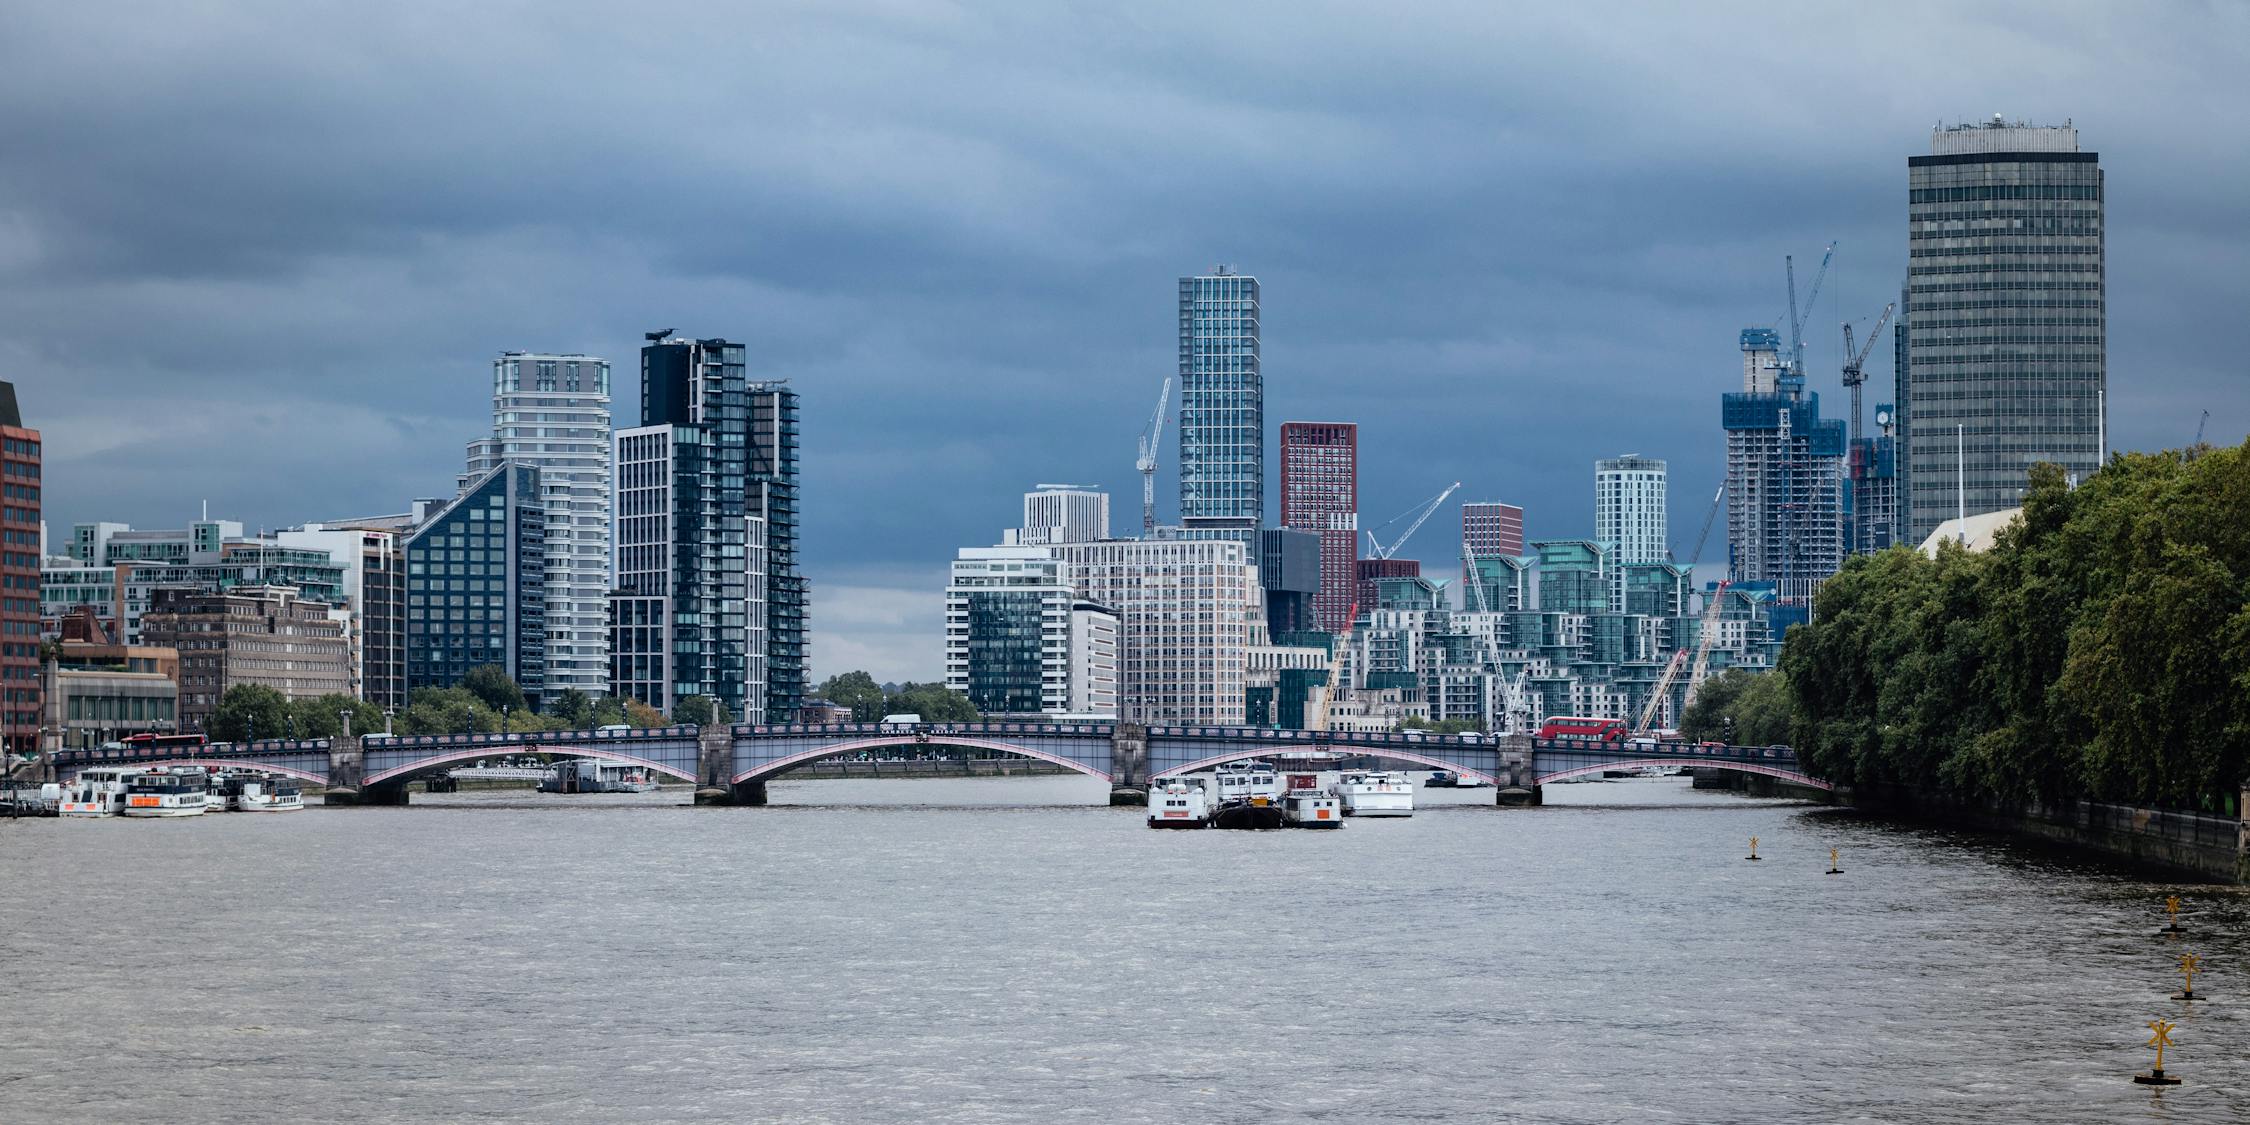 Photograph of the London skyline from the River Thames